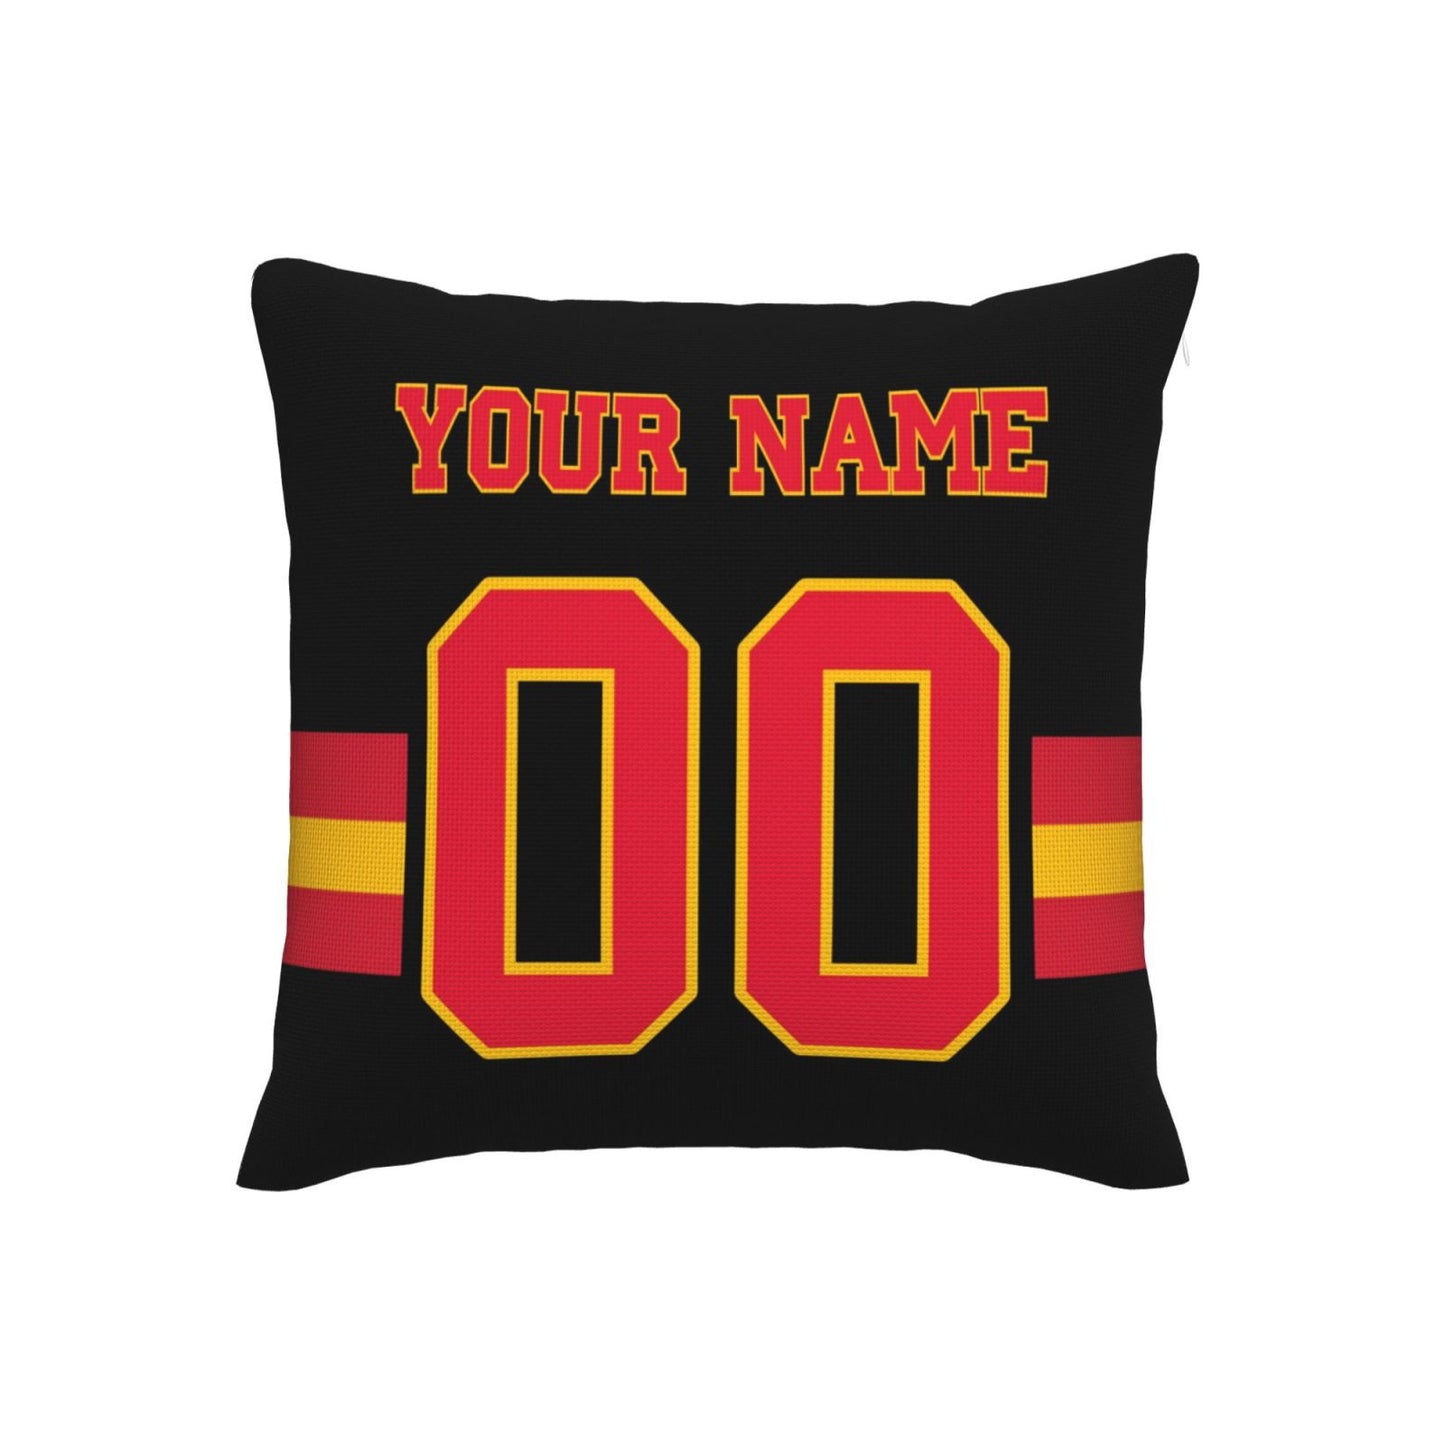 Customized Kansas City Chiefs Football Team Decorative Throw Pillow Case Print Personalized Football Style Fans Letters & Number Black Pillowcase Birthday Gift